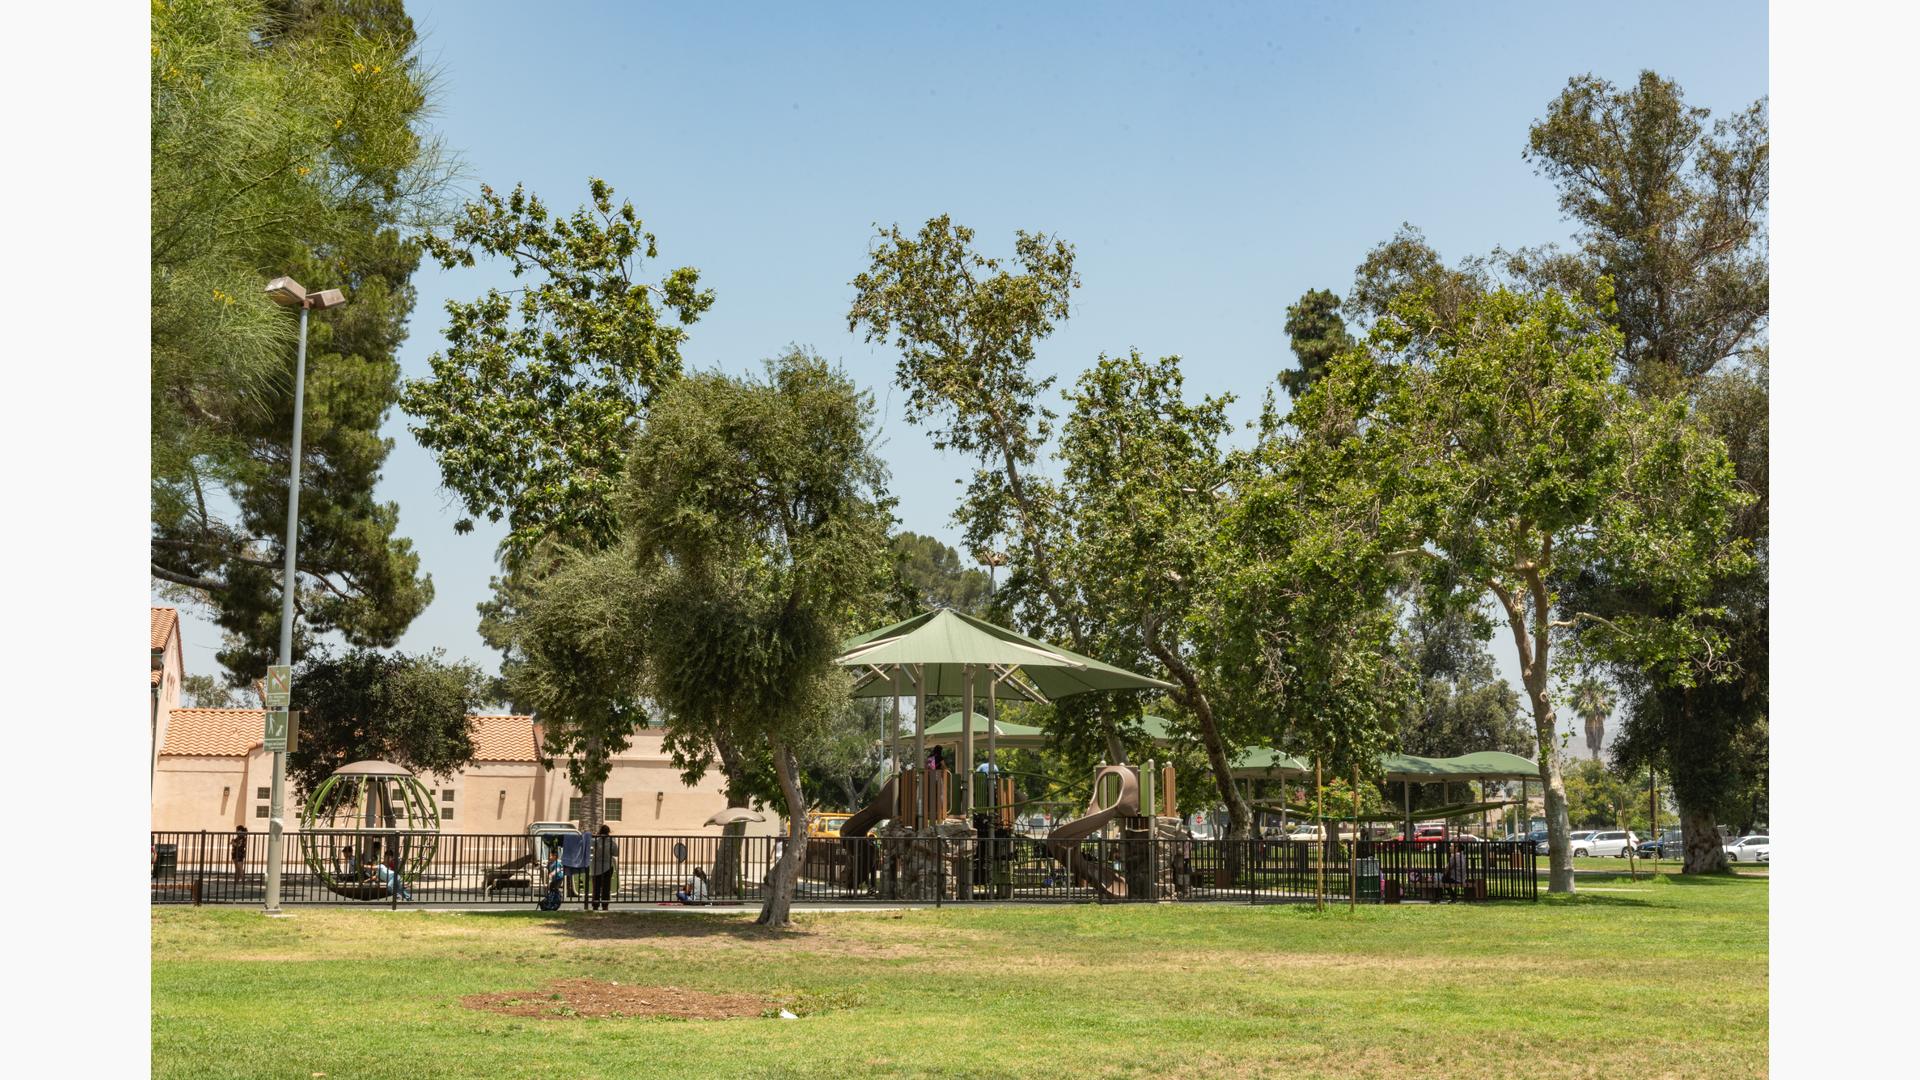 Large trees give a natural canopy to the Sun Valley Rec Center playground. The playground features rock climbers, a double ZipKrooz, and Skyways shade panels in addition to the natural tree shade.